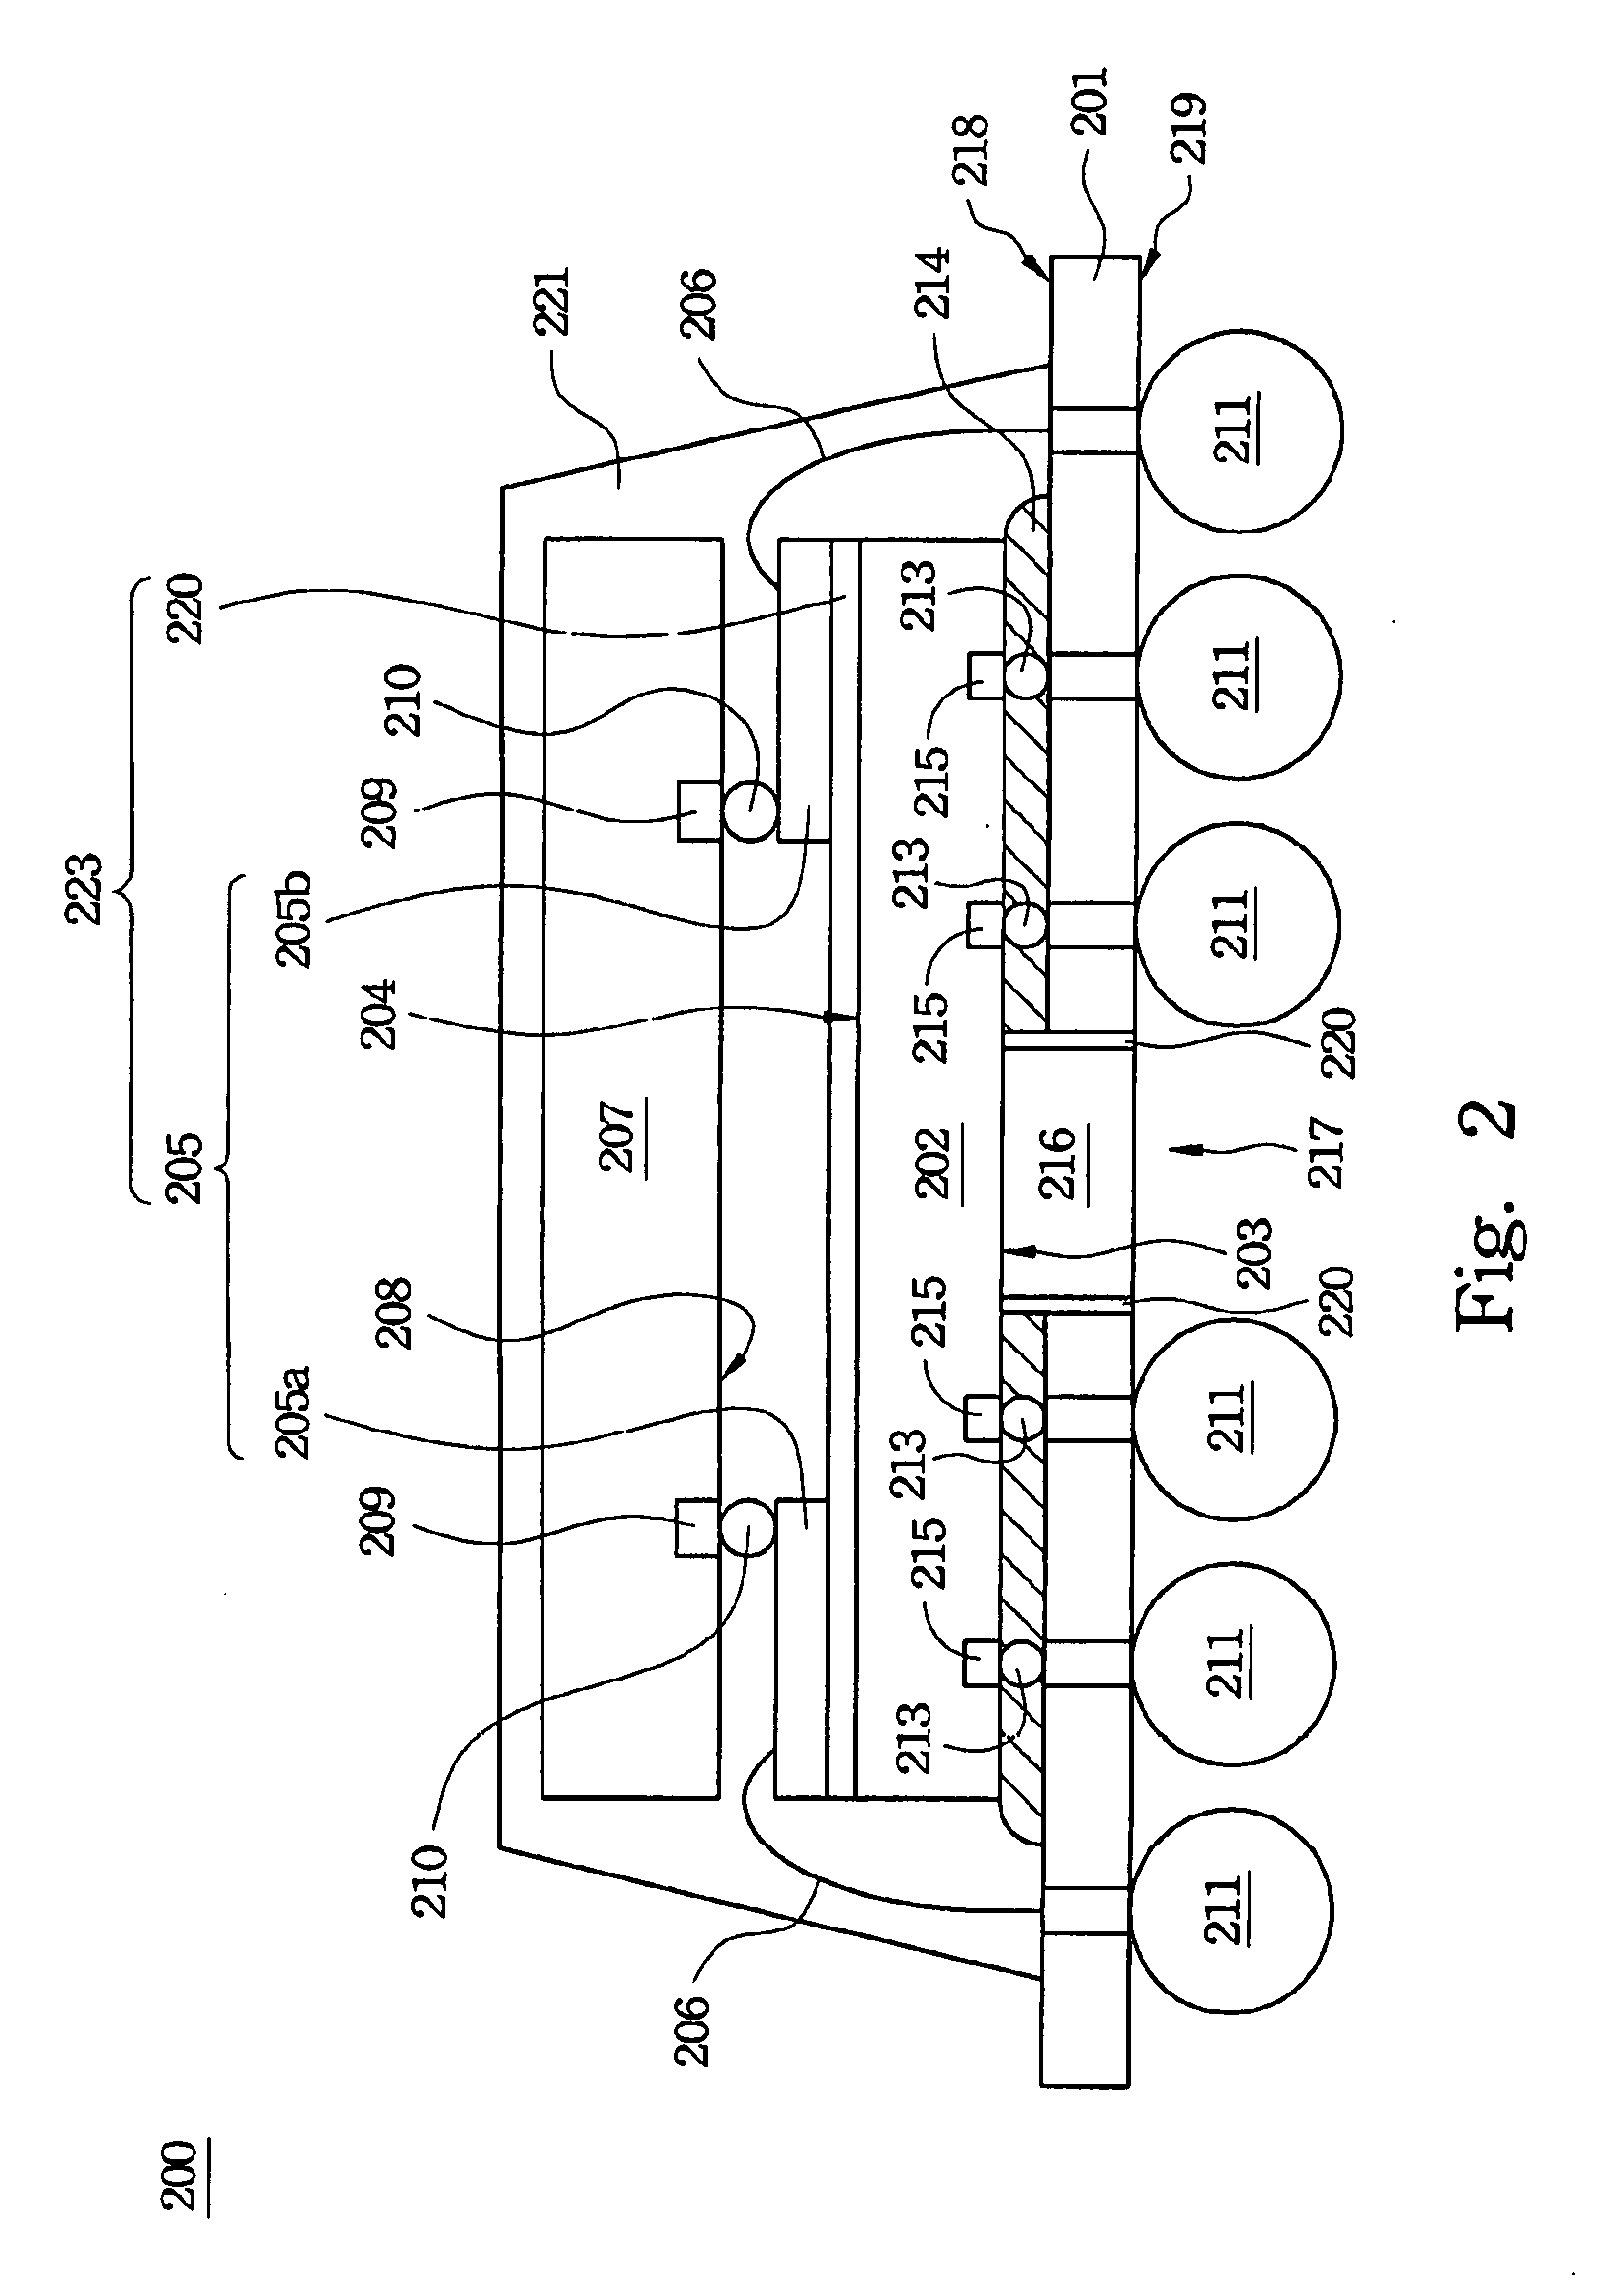 Chip-Stacked Package Structure and Applications Thereof